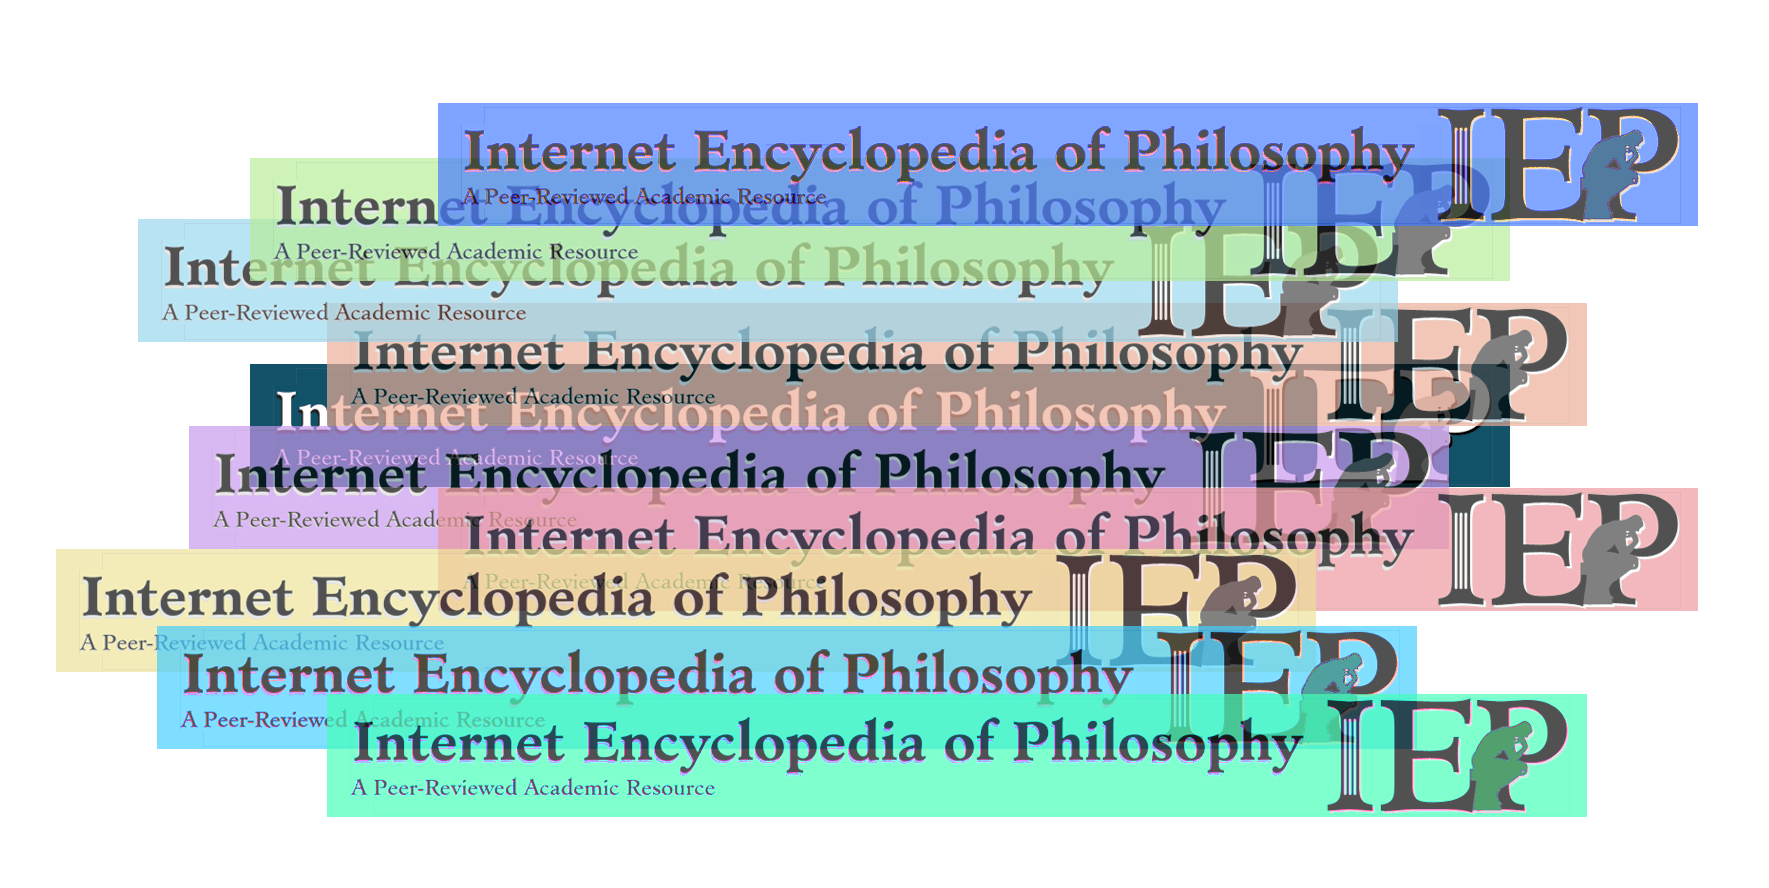 Thales the Philosopher, Theory & Contributions - Video & Lesson Transcript